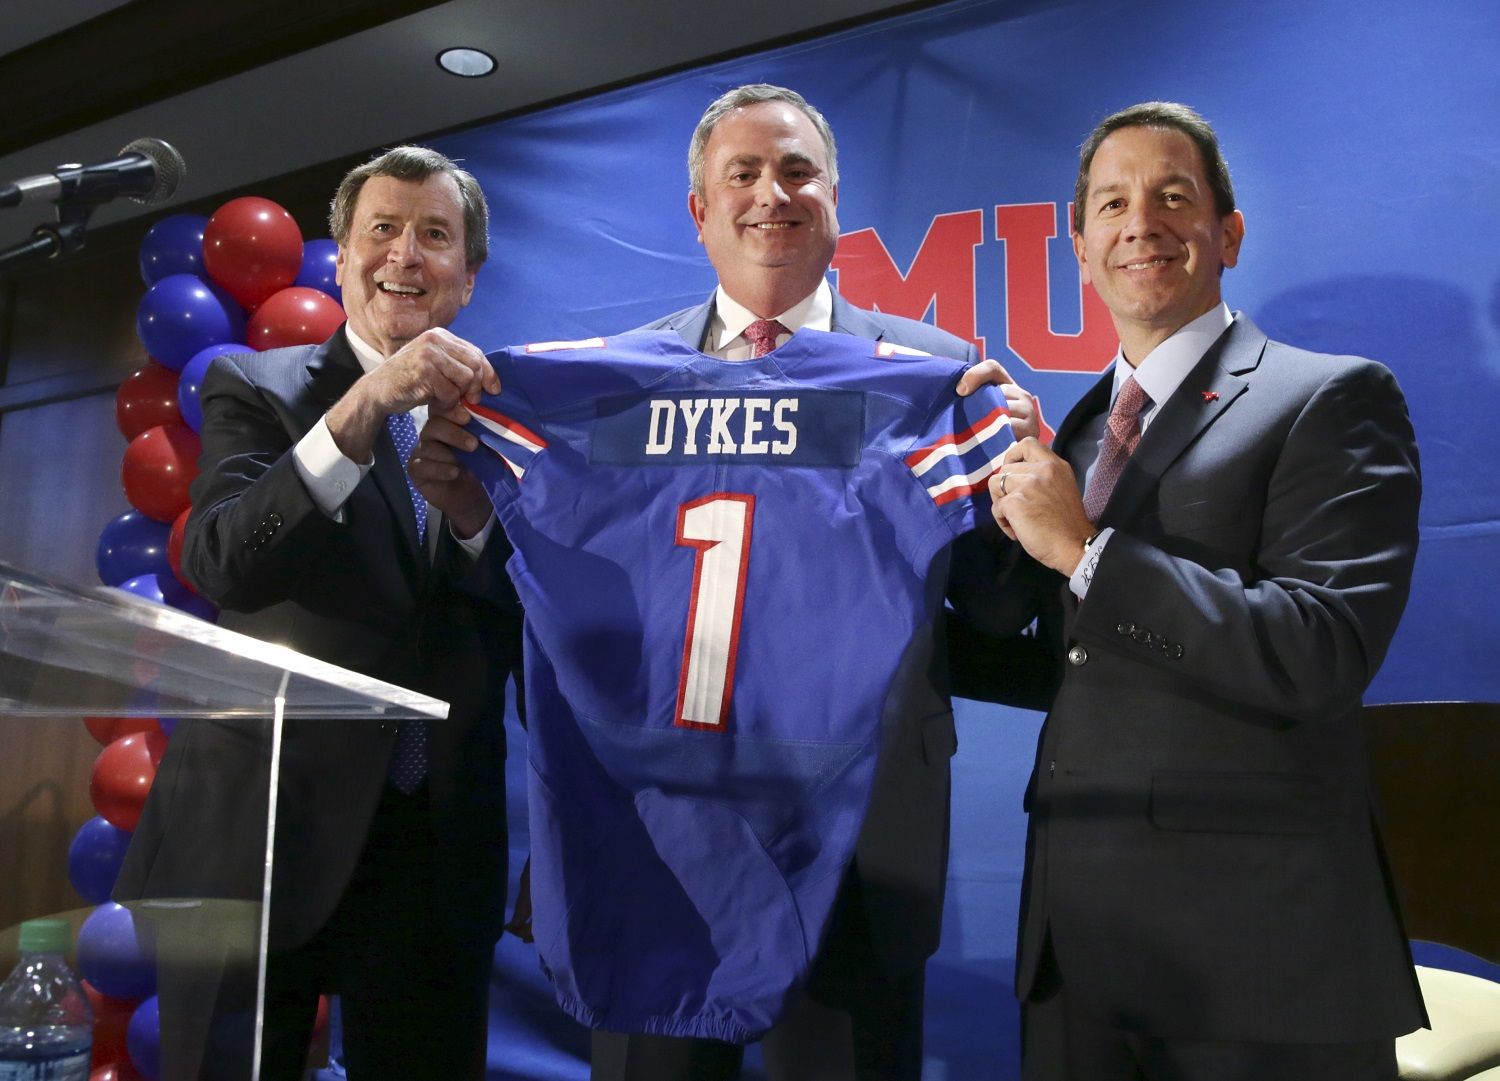 New SMU head football coach Sonny Dykes, center, holds up a jersey with university president Gerald Turner, left, and athletic director Rick Hart after Dykes' introduction in Dallas, Tuesday, Dec. 12, 2017. SMU hired the former California and Louisiana Tech coach as its new coach, replacing one Texan with reputation for directing potent offenses for another. Dykes will replace Chad Morris, who left SMU last week to become Arkansas' coach.(AP Photo/LM Otero)